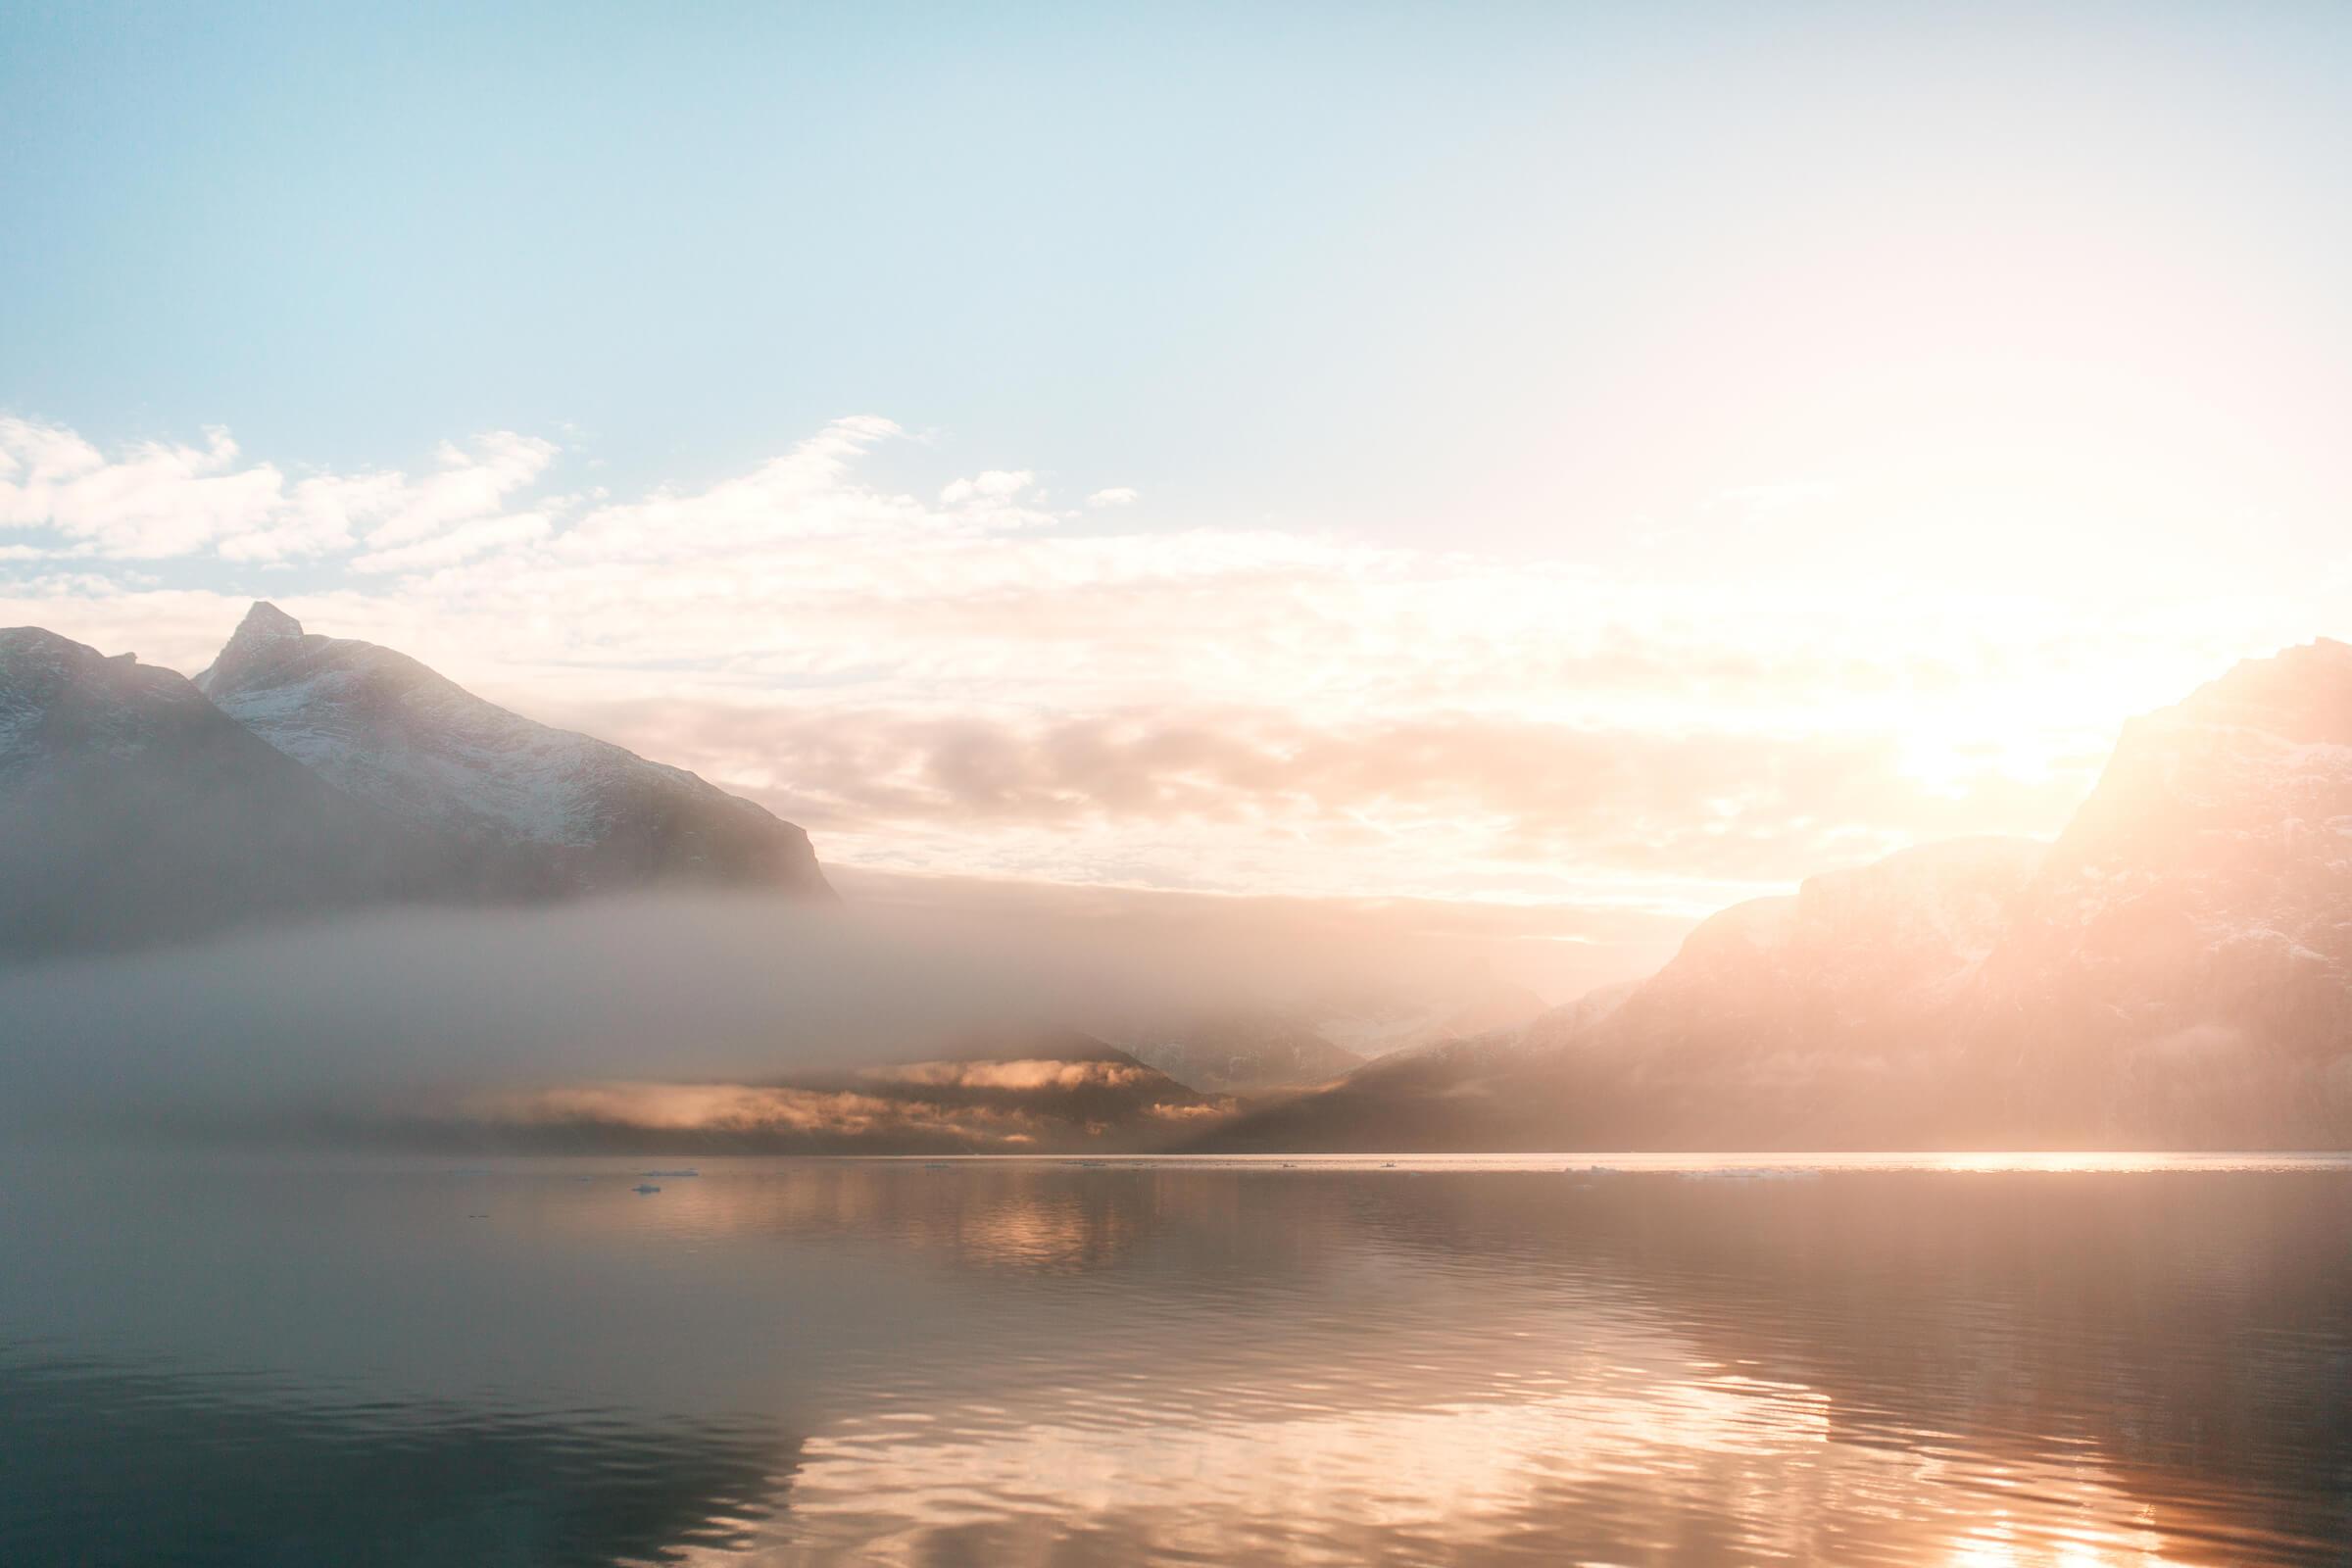 Sunrise over the mountains in the Nuuk fjord in Greenland. Photo by Rebecca Gustafsson